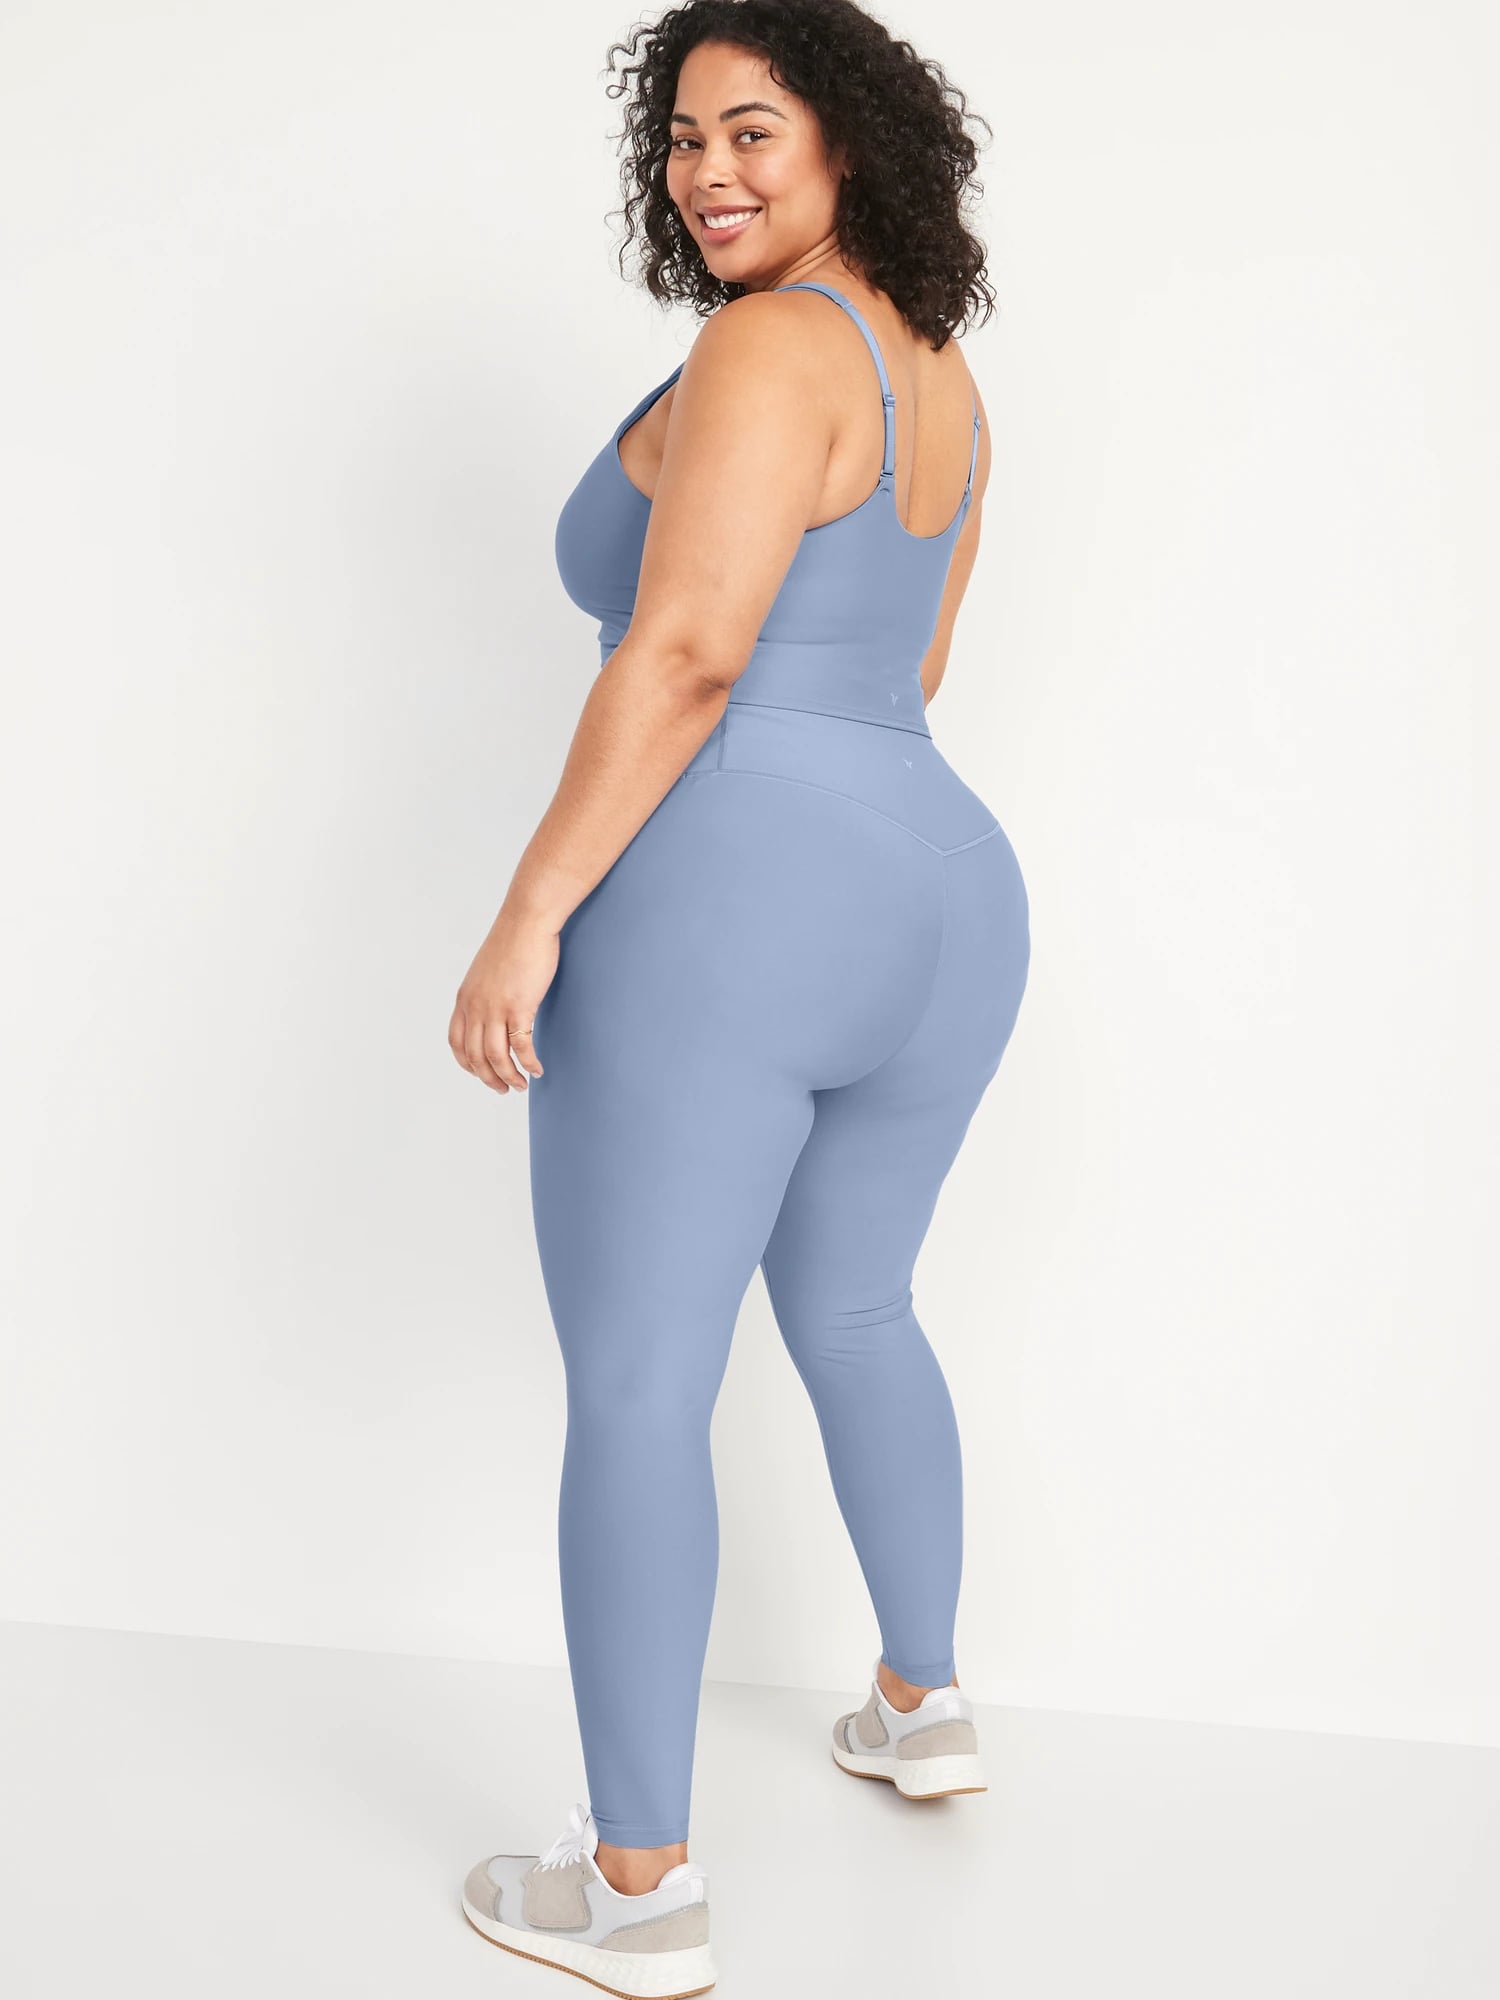 Where To Find The Best Plus-Size Workout Clothes And Activewear